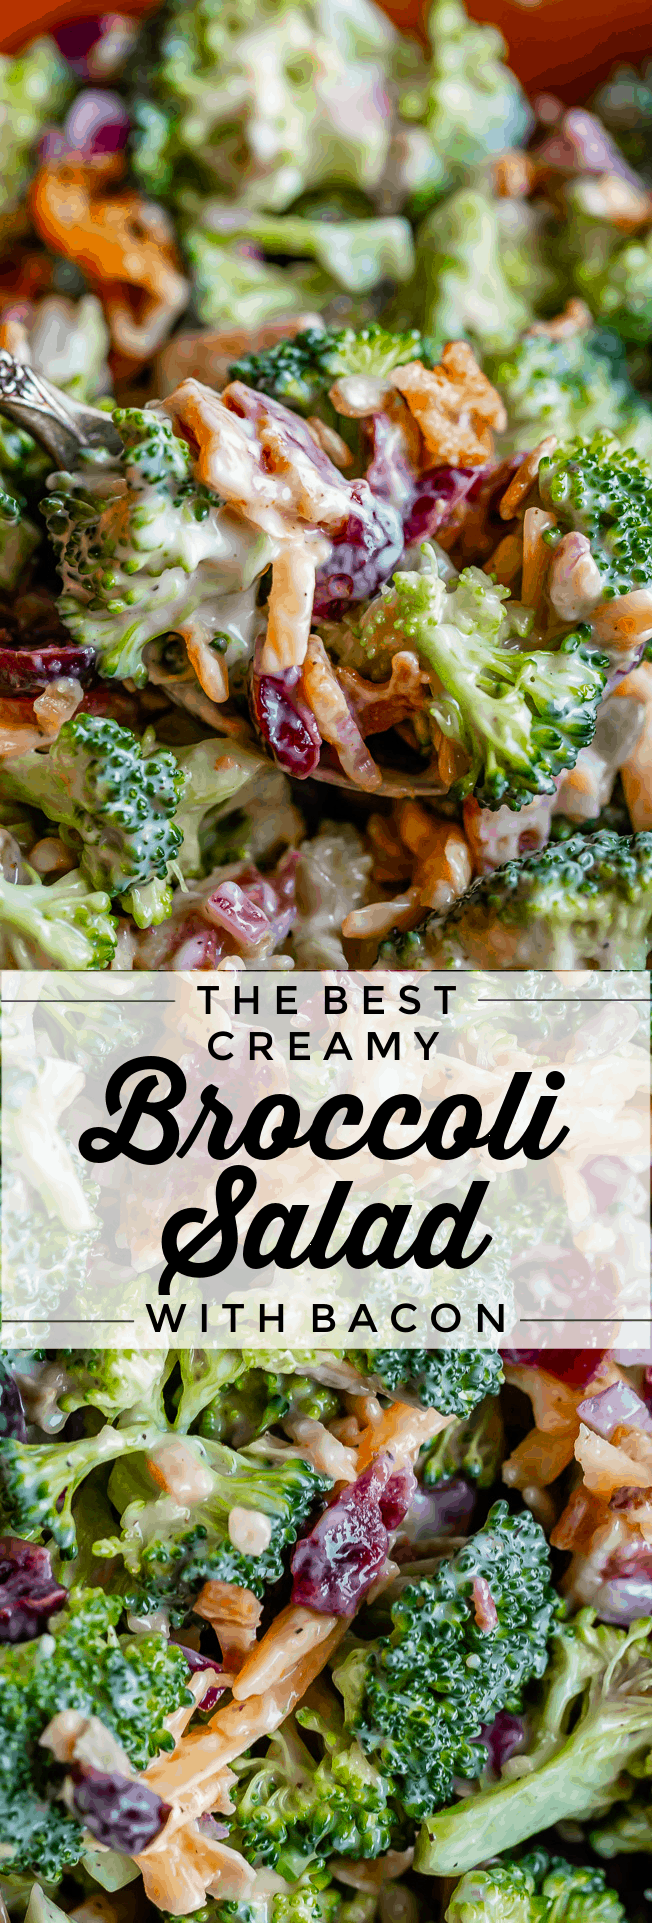 Easy Broccoli Bacon Salad from The Food Charlatan - Easy Broccoli Bacon Salad from The Food Charlatan -   21 thanksgiving recipes side dishes easy ideas